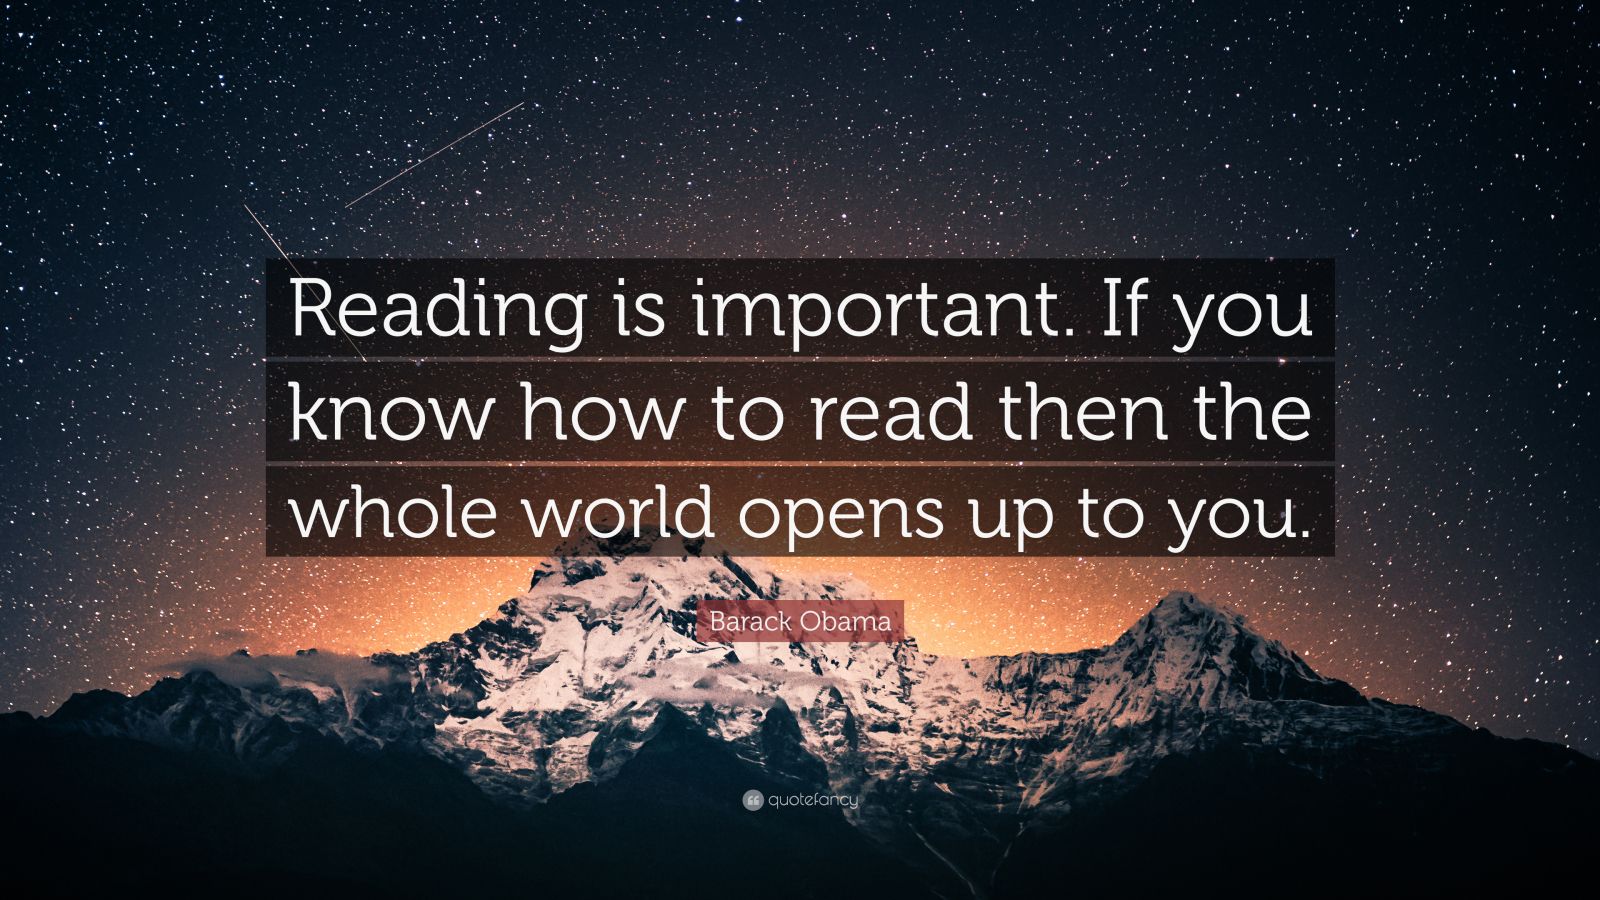 Barack Obama Quote “reading Is Important If You Know How To Read Then